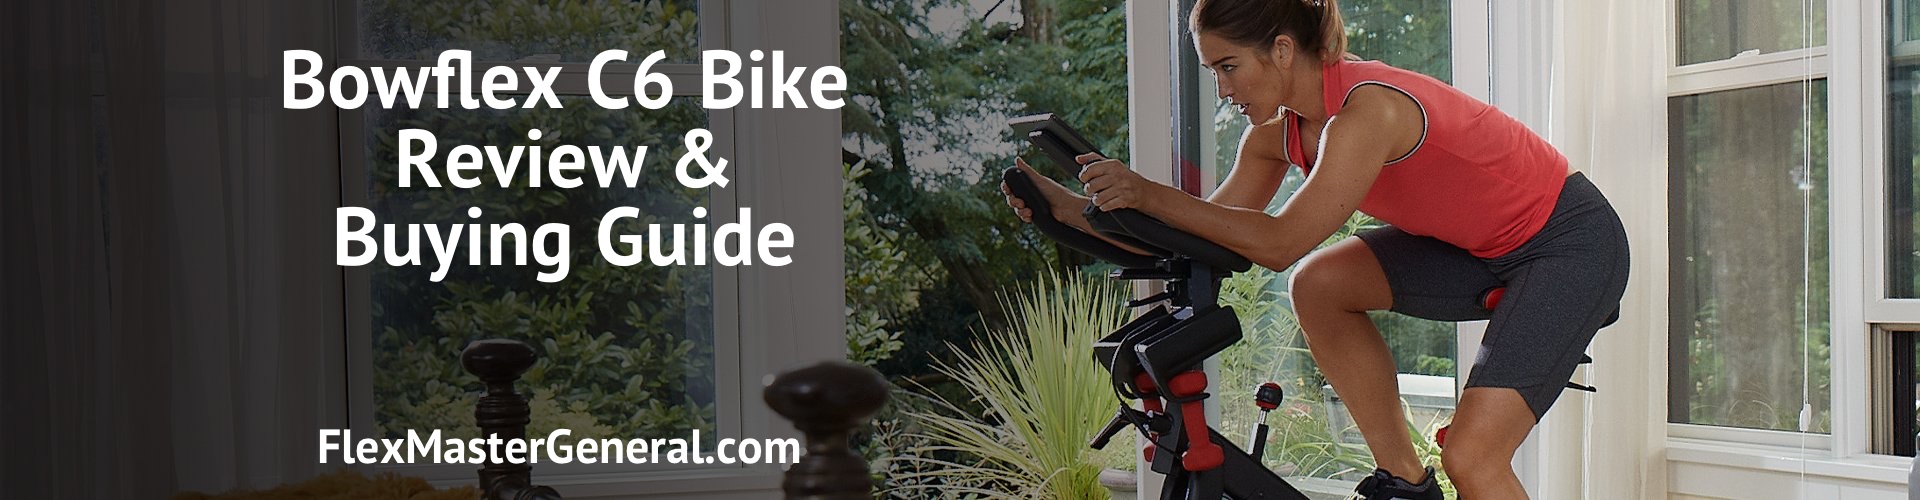 Bowflex C6 Bike Review: Prices, Specs + Where to Buy